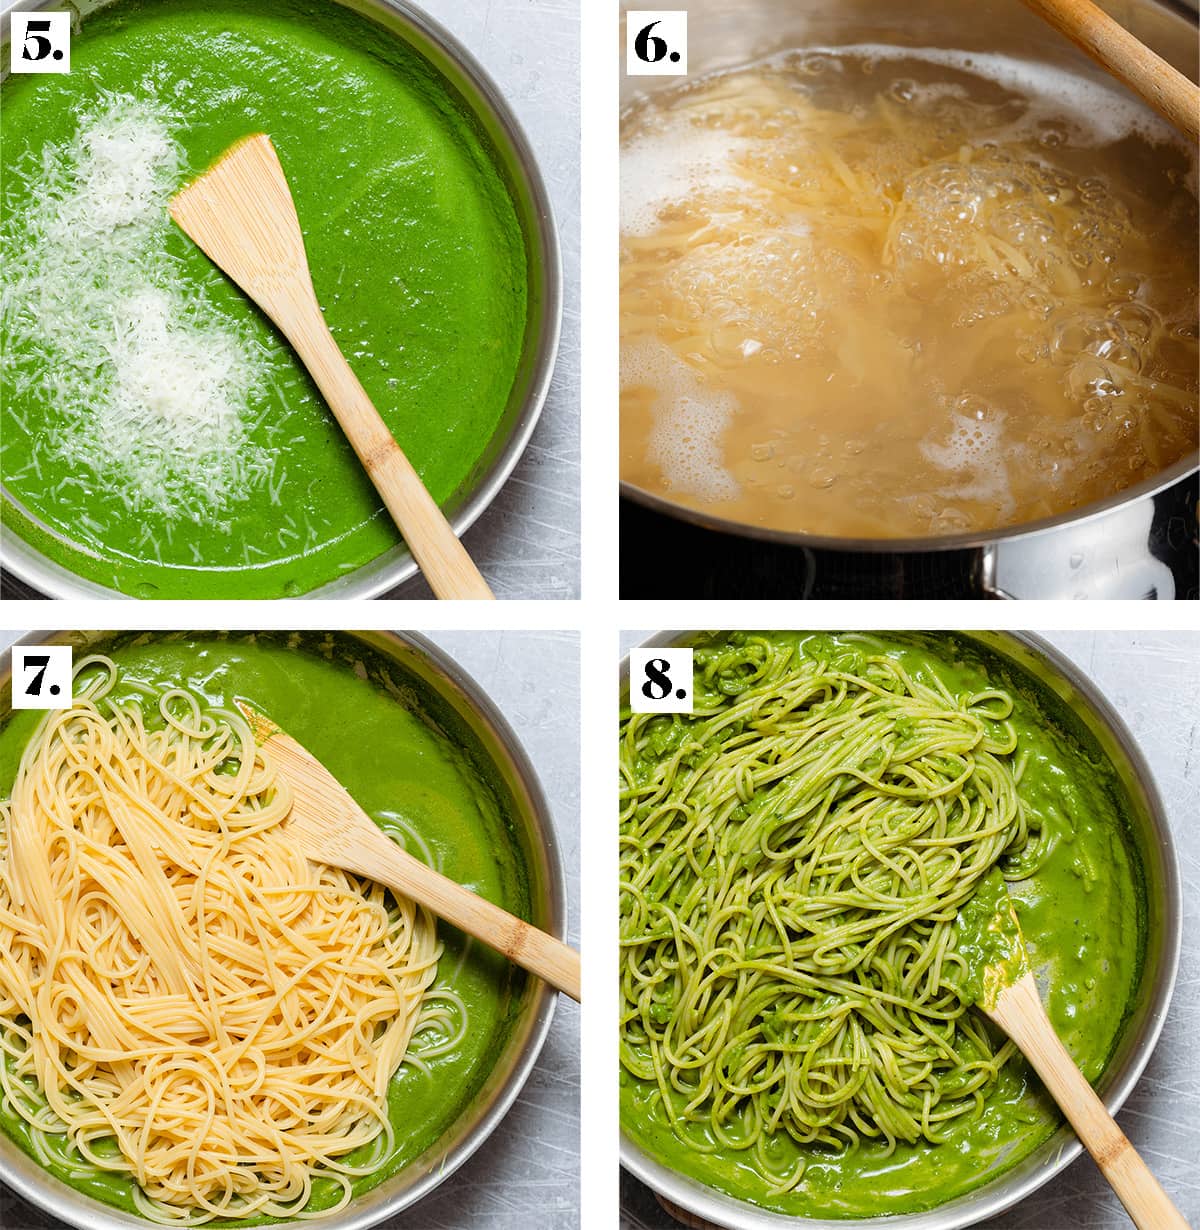 Four process shots showing how to cook spaghetti and tossing it with green pasta sauce and parmesan.